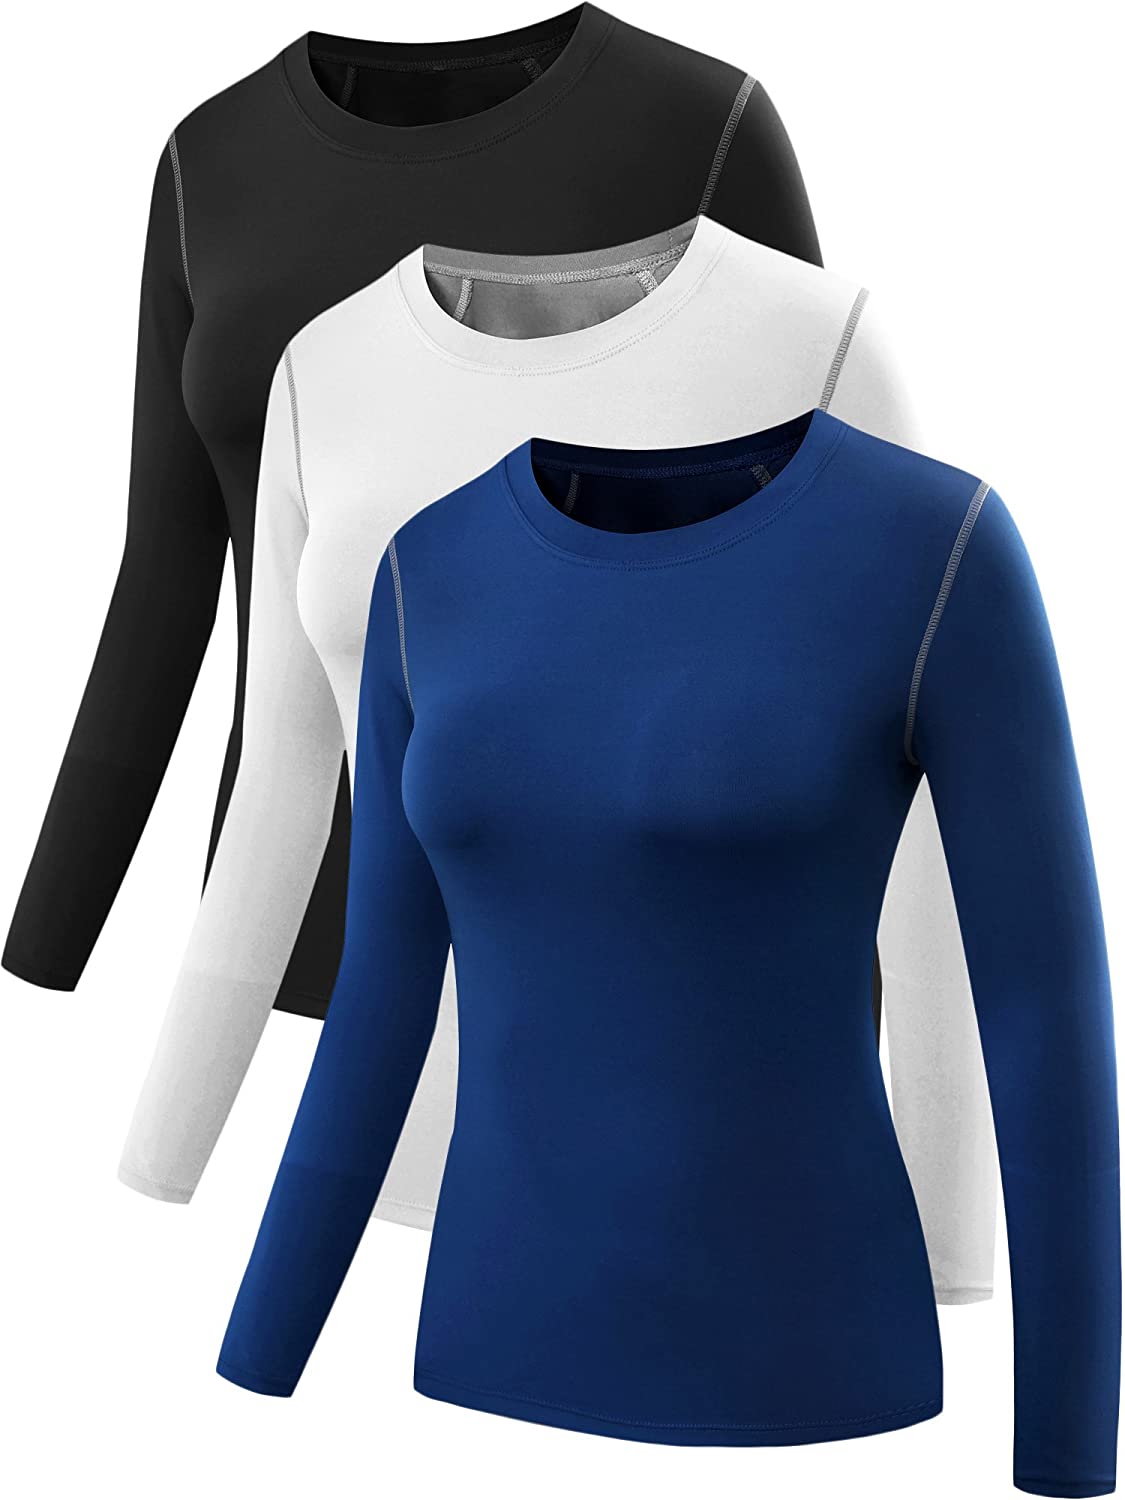 NELEUS Womens 3 Pack Compression Athletic Long Sleeve Shirts For Girls